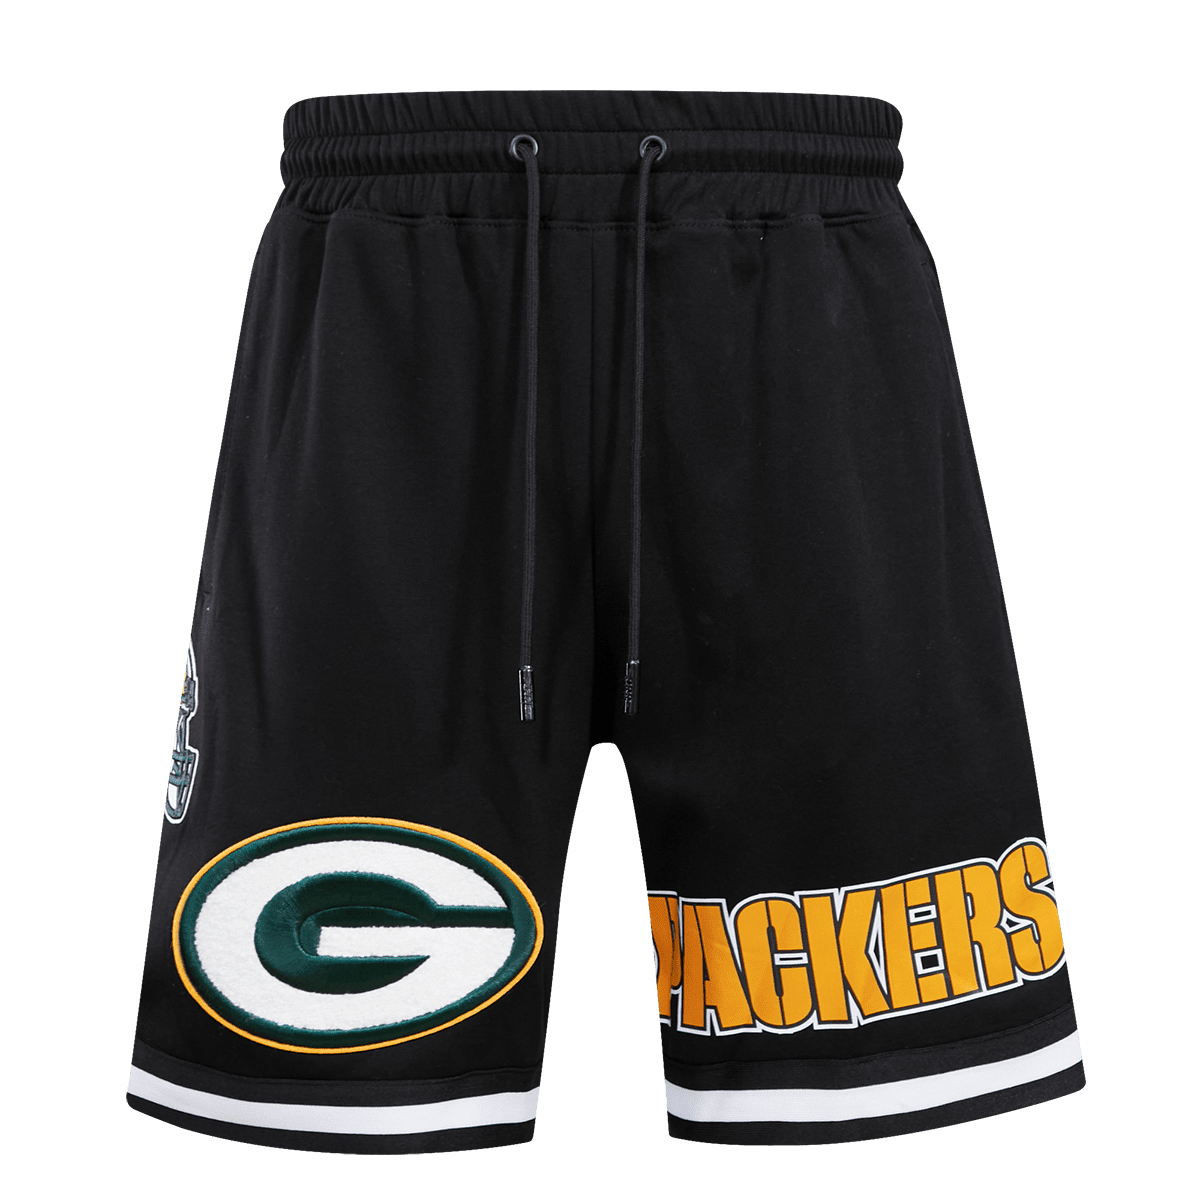 green bay packers womens apparel amazon